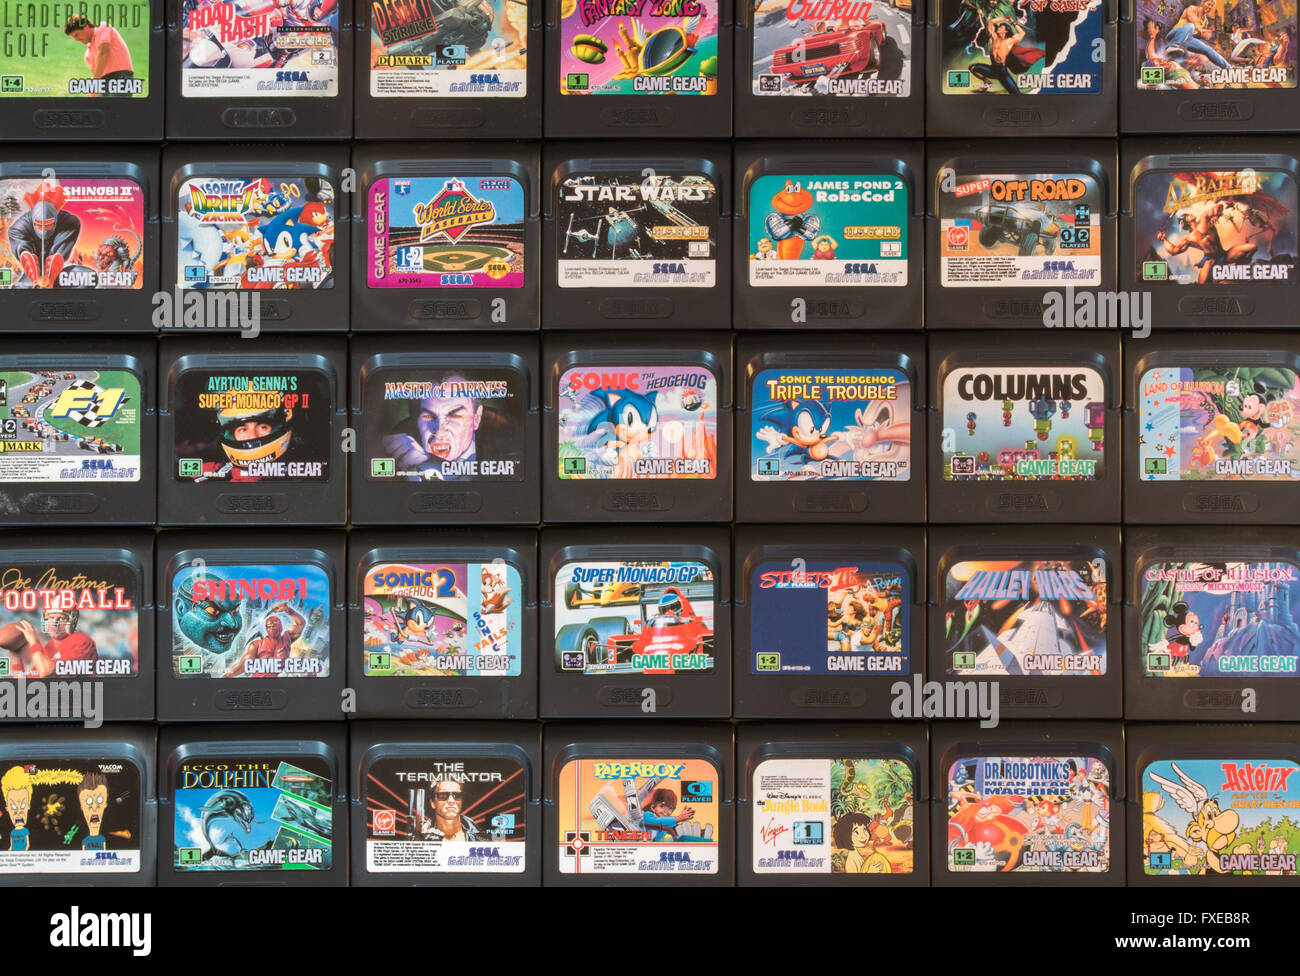 All Sonic Game Gear Games 1991-1996 